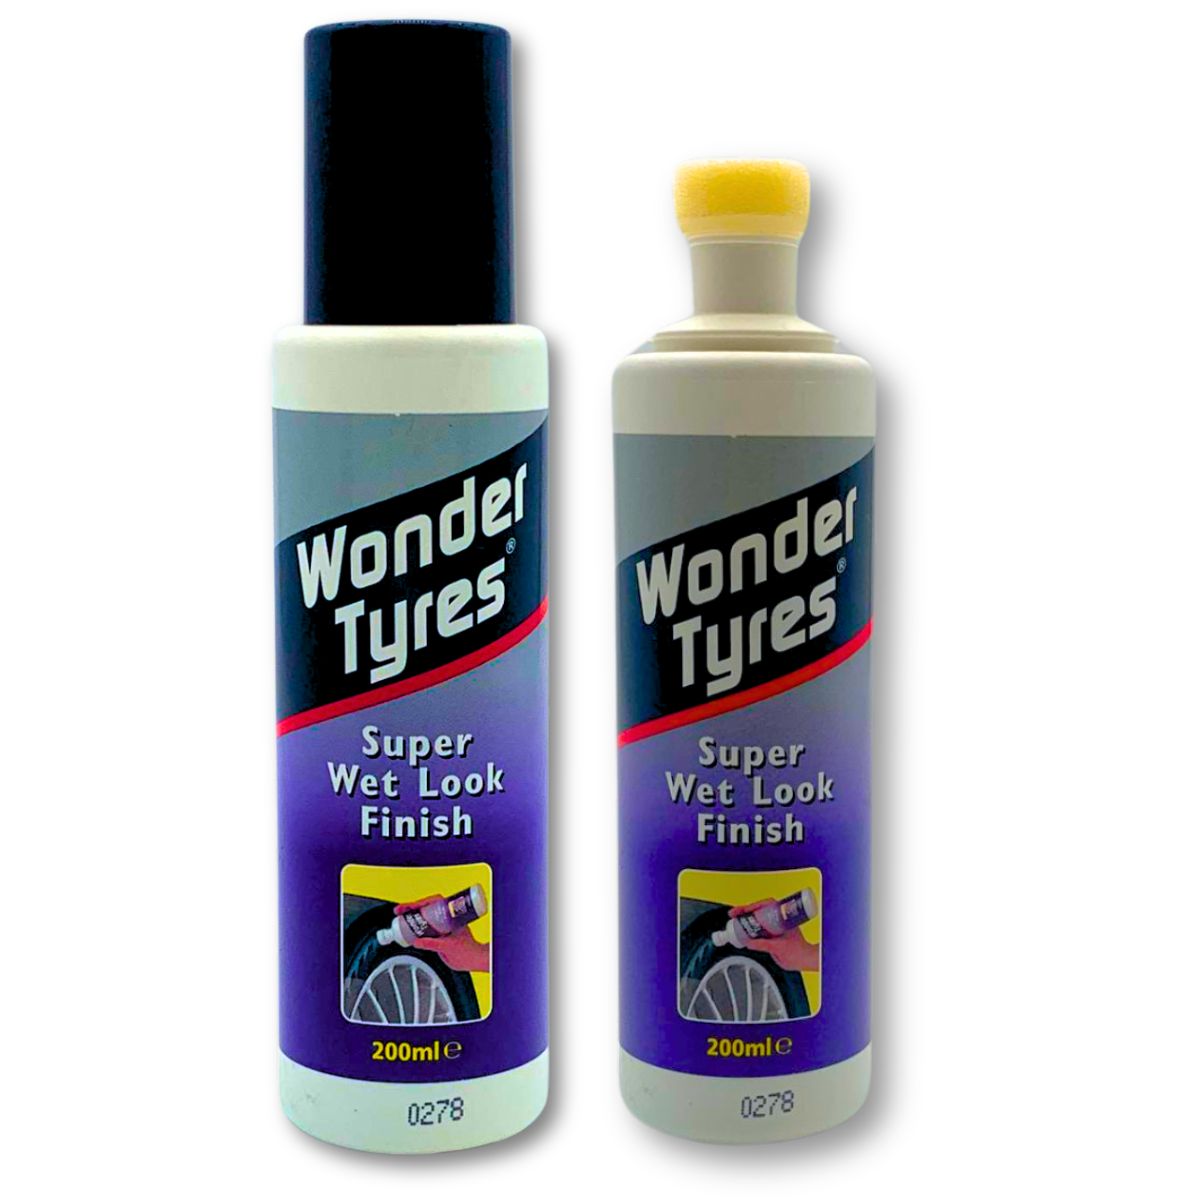 Wonder Wheels | Super Wet Look tyre high gloss finish - South East Clearance Centre